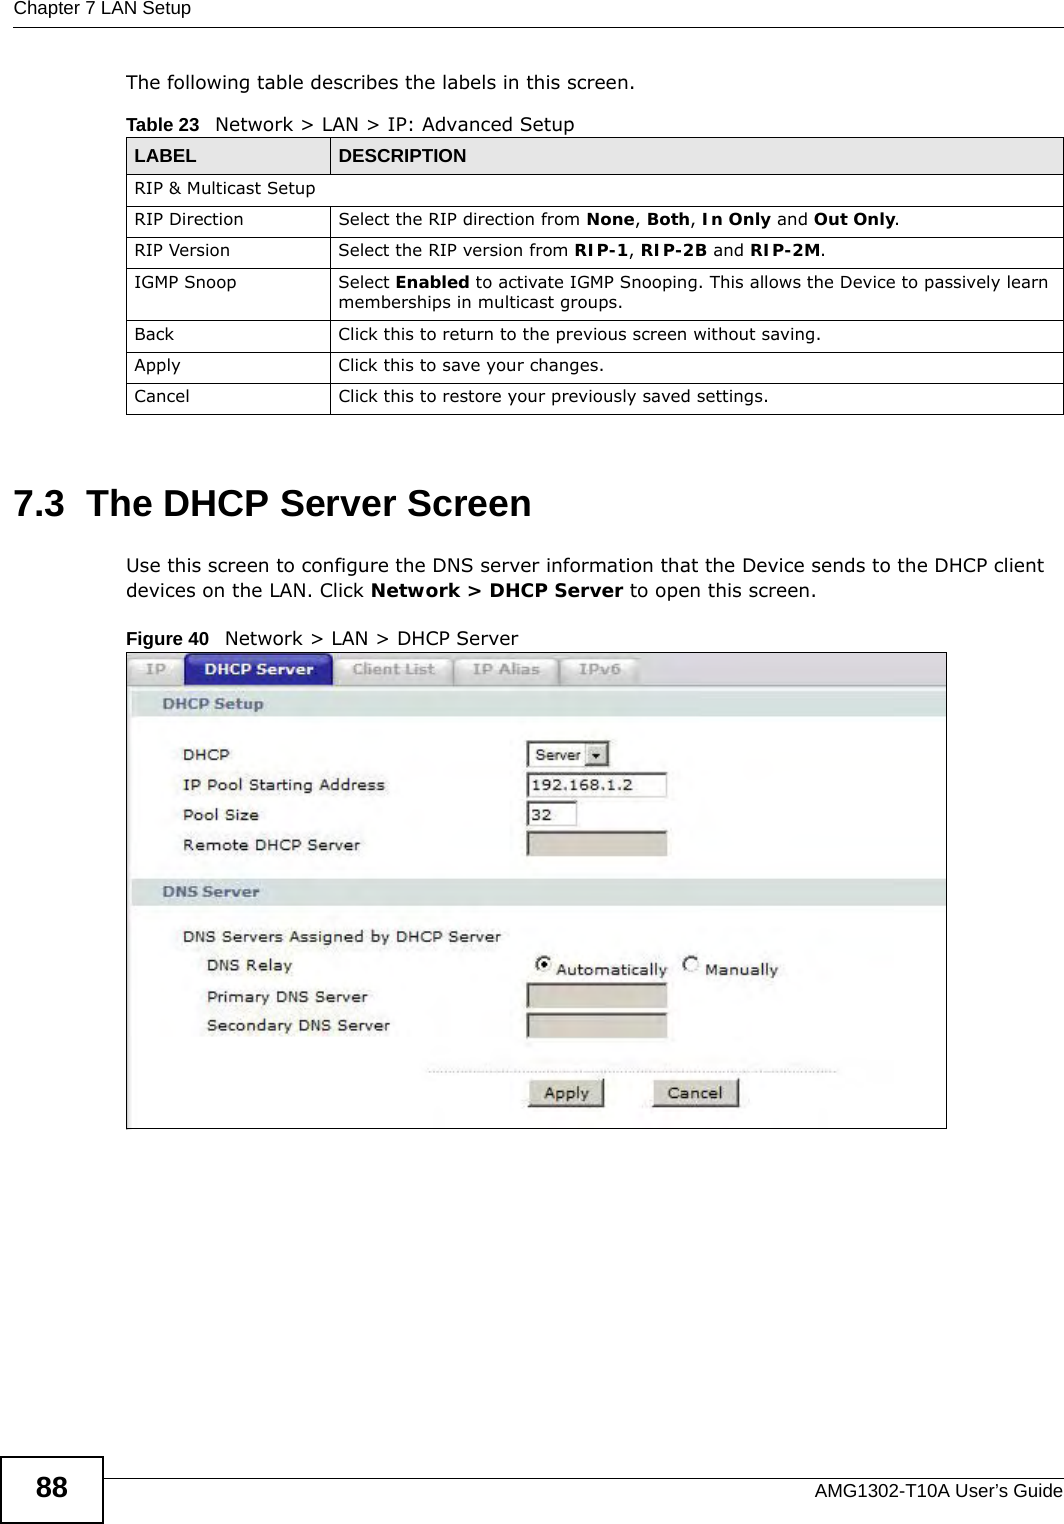 Chapter 7 LAN SetupAMG1302-T10A User’s Guide88The following table describes the labels in this screen.  7.3  The DHCP Server ScreenUse this screen to configure the DNS server information that the Device sends to the DHCP client devices on the LAN. Click Network &gt; DHCP Server to open this screen.Figure 40   Network &gt; LAN &gt; DHCP ServerTable 23   Network &gt; LAN &gt; IP: Advanced SetupLABEL DESCRIPTIONRIP &amp; Multicast SetupRIP Direction Select the RIP direction from None, Both, In Only and Out Only.RIP Version Select the RIP version from RIP-1, RIP-2B and RIP-2M.IGMP Snoop Select Enabled to activate IGMP Snooping. This allows the Device to passively learn memberships in multicast groups.Back Click this to return to the previous screen without saving.Apply Click this to save your changes.Cancel Click this to restore your previously saved settings.